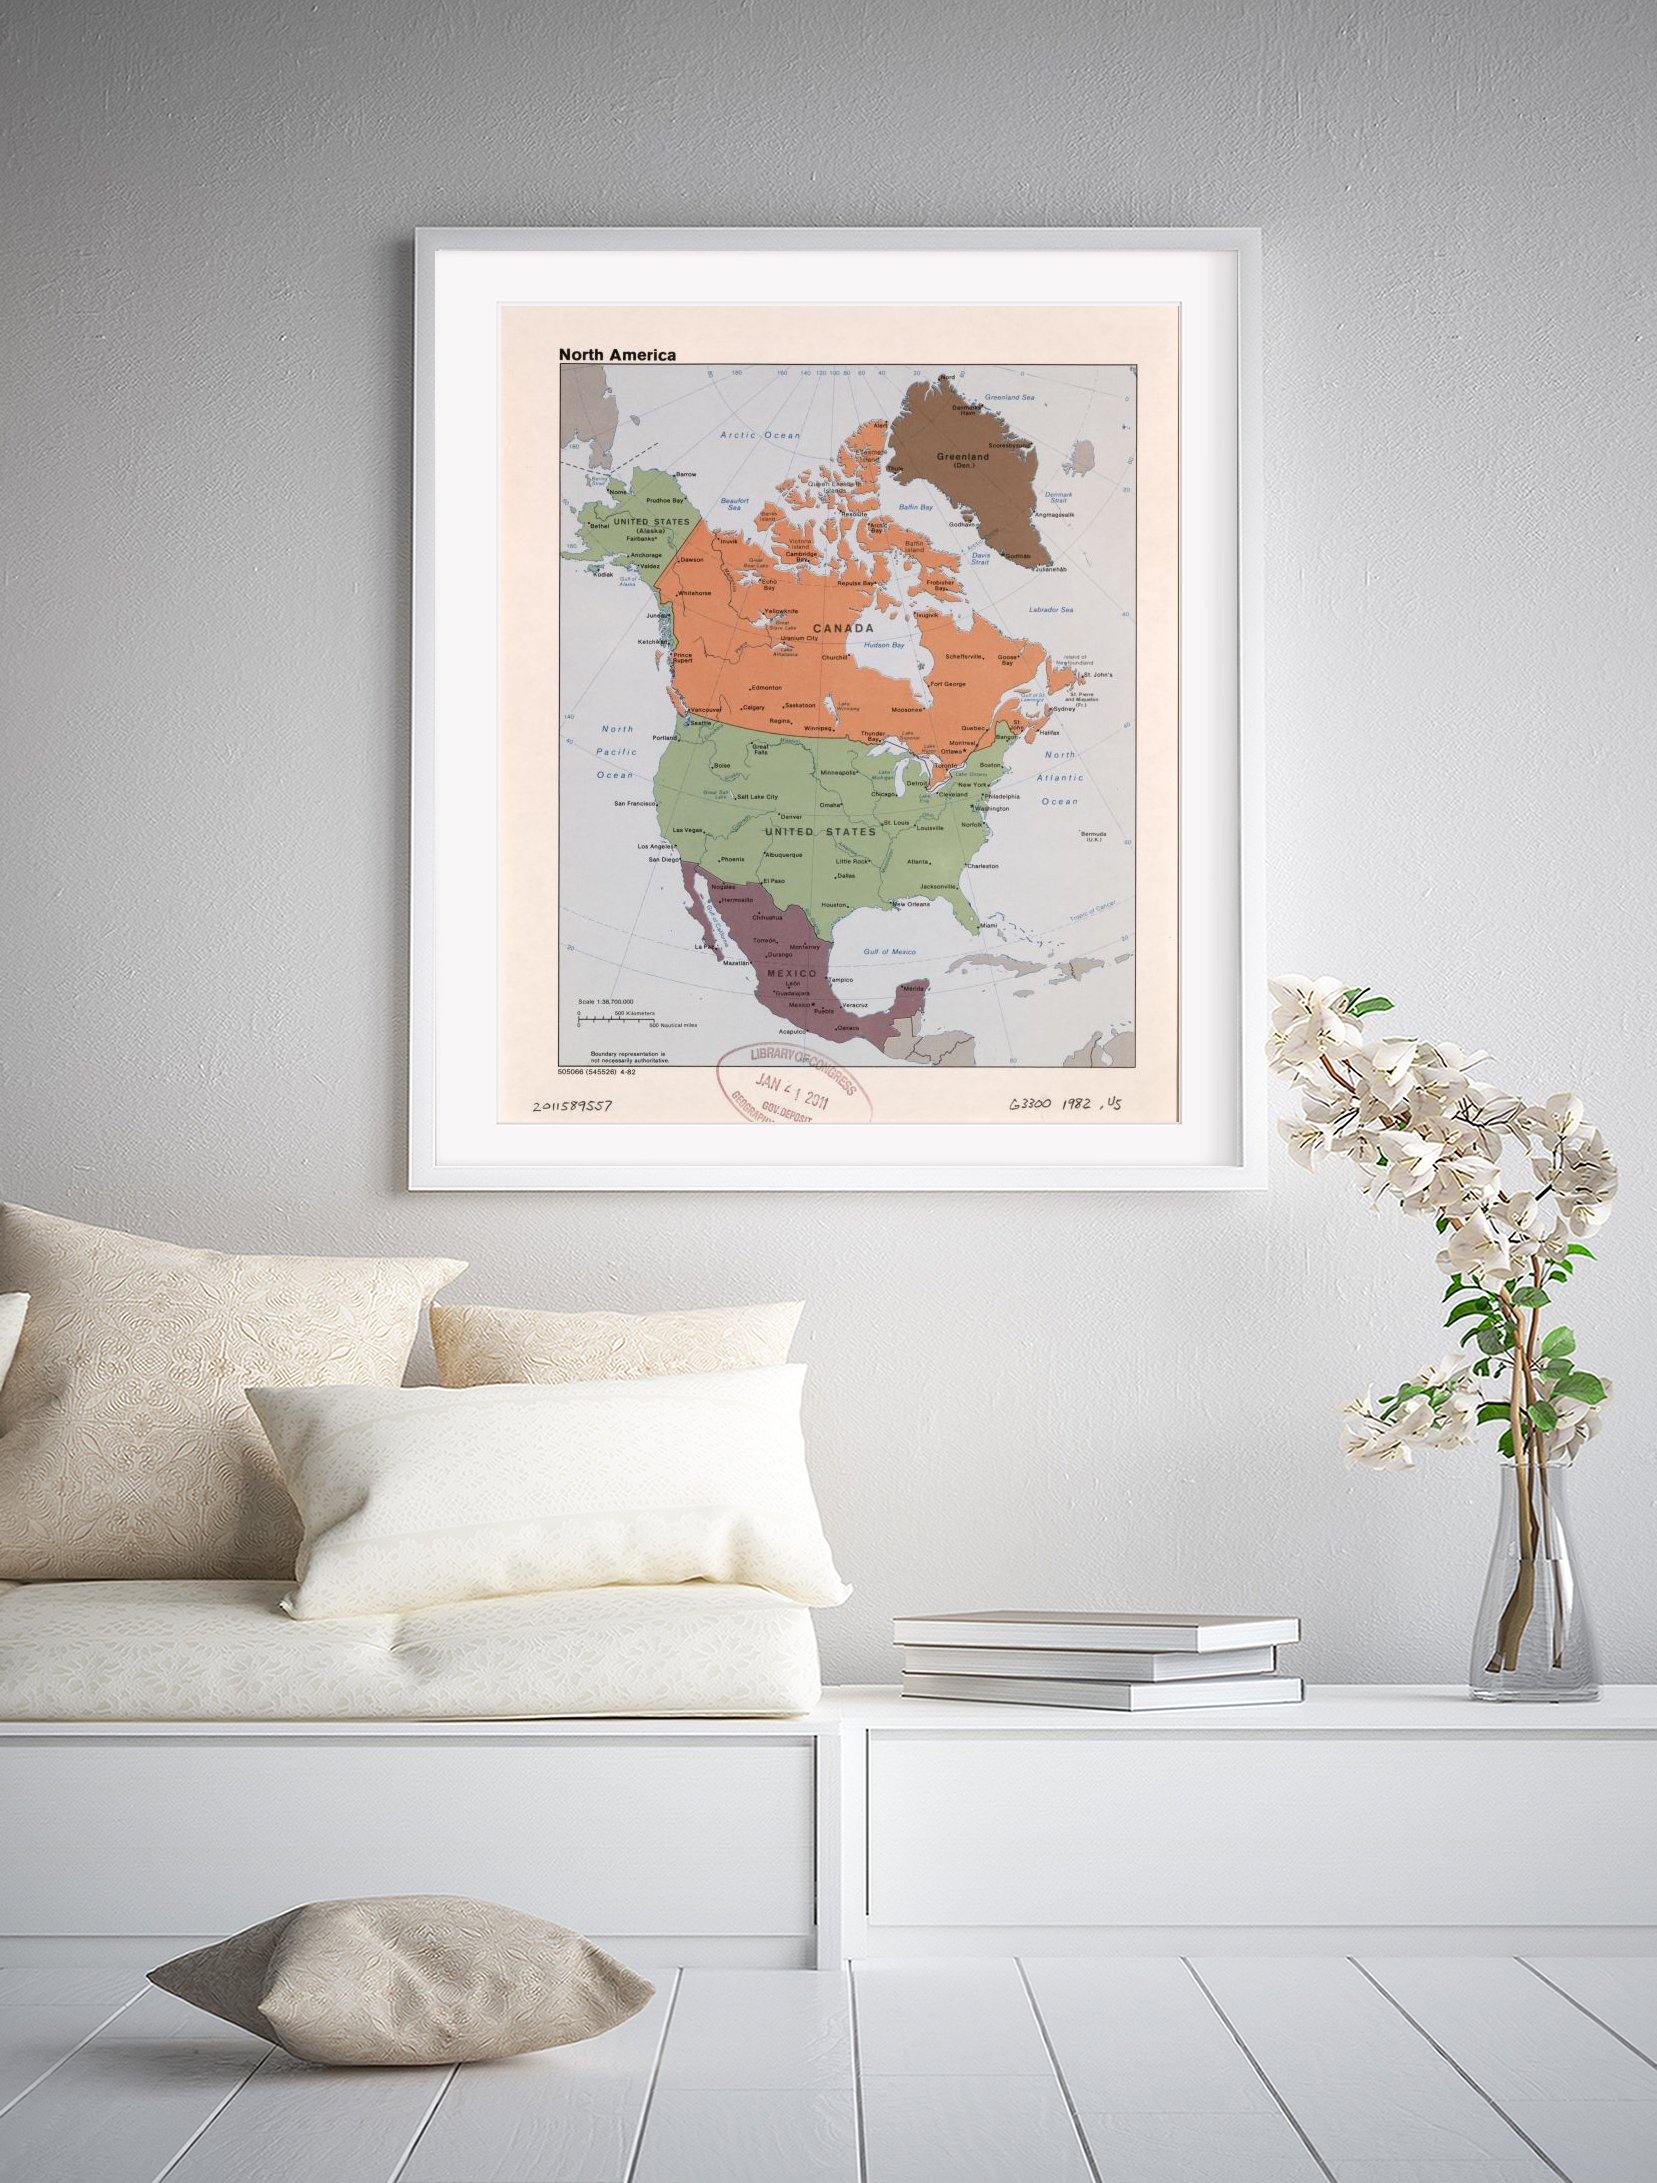 1982 Map| North America| North America Map Size: 20 inches x 24 inches - New York Map Company